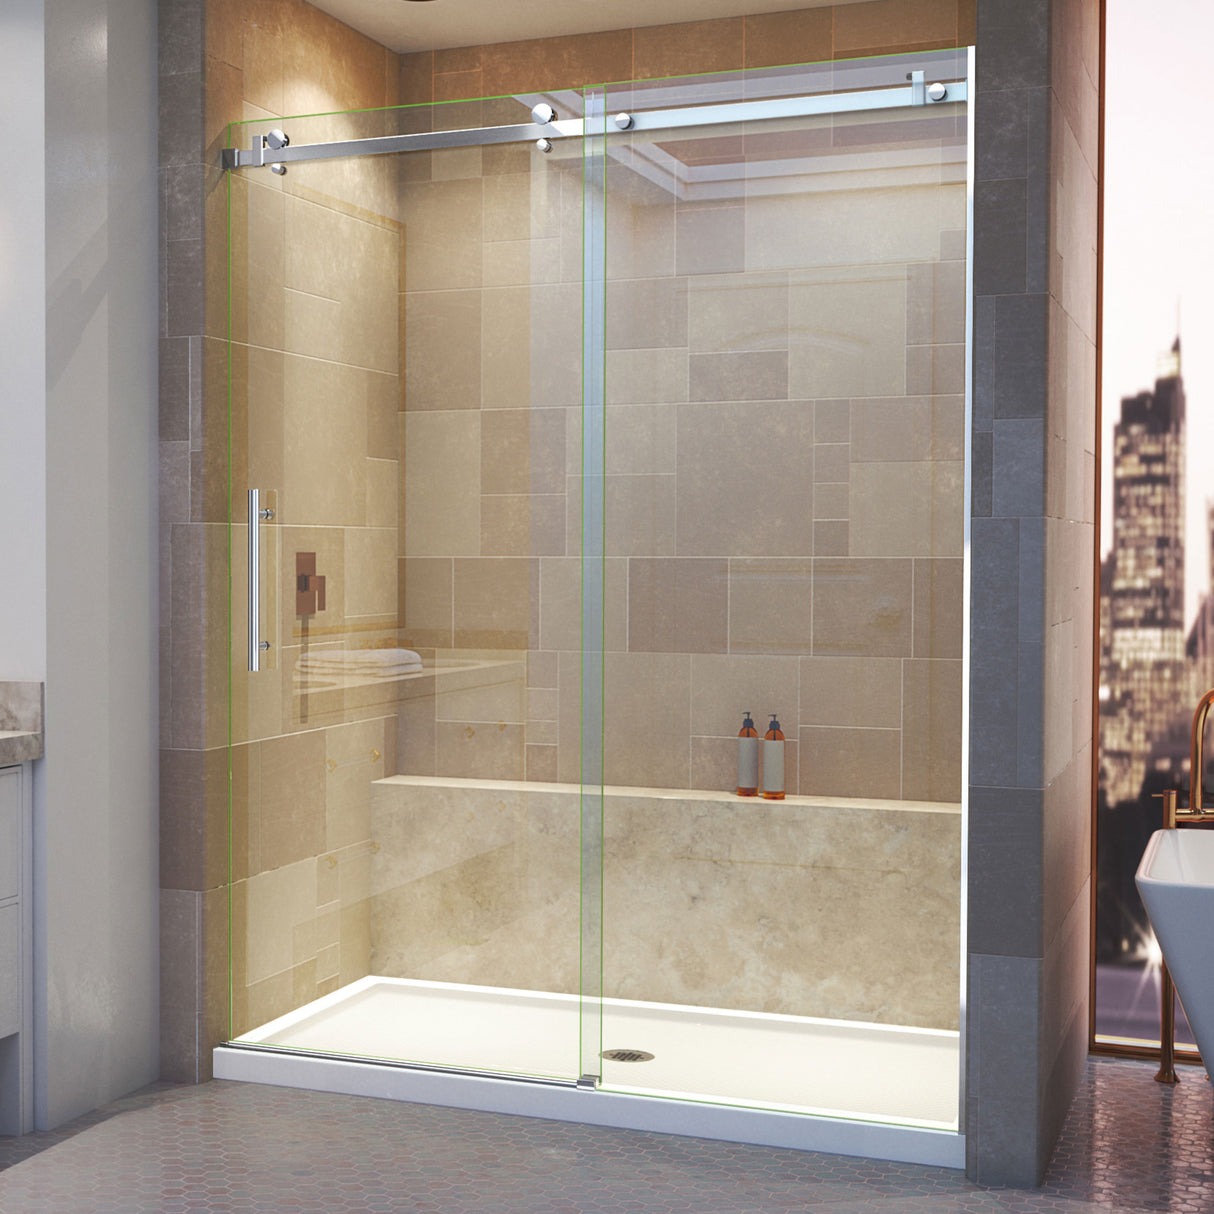 DreamLine Enigma Air 56-60 in. W x 76 in. H Frameless Sliding Shower Door in Polished Stainless Steel